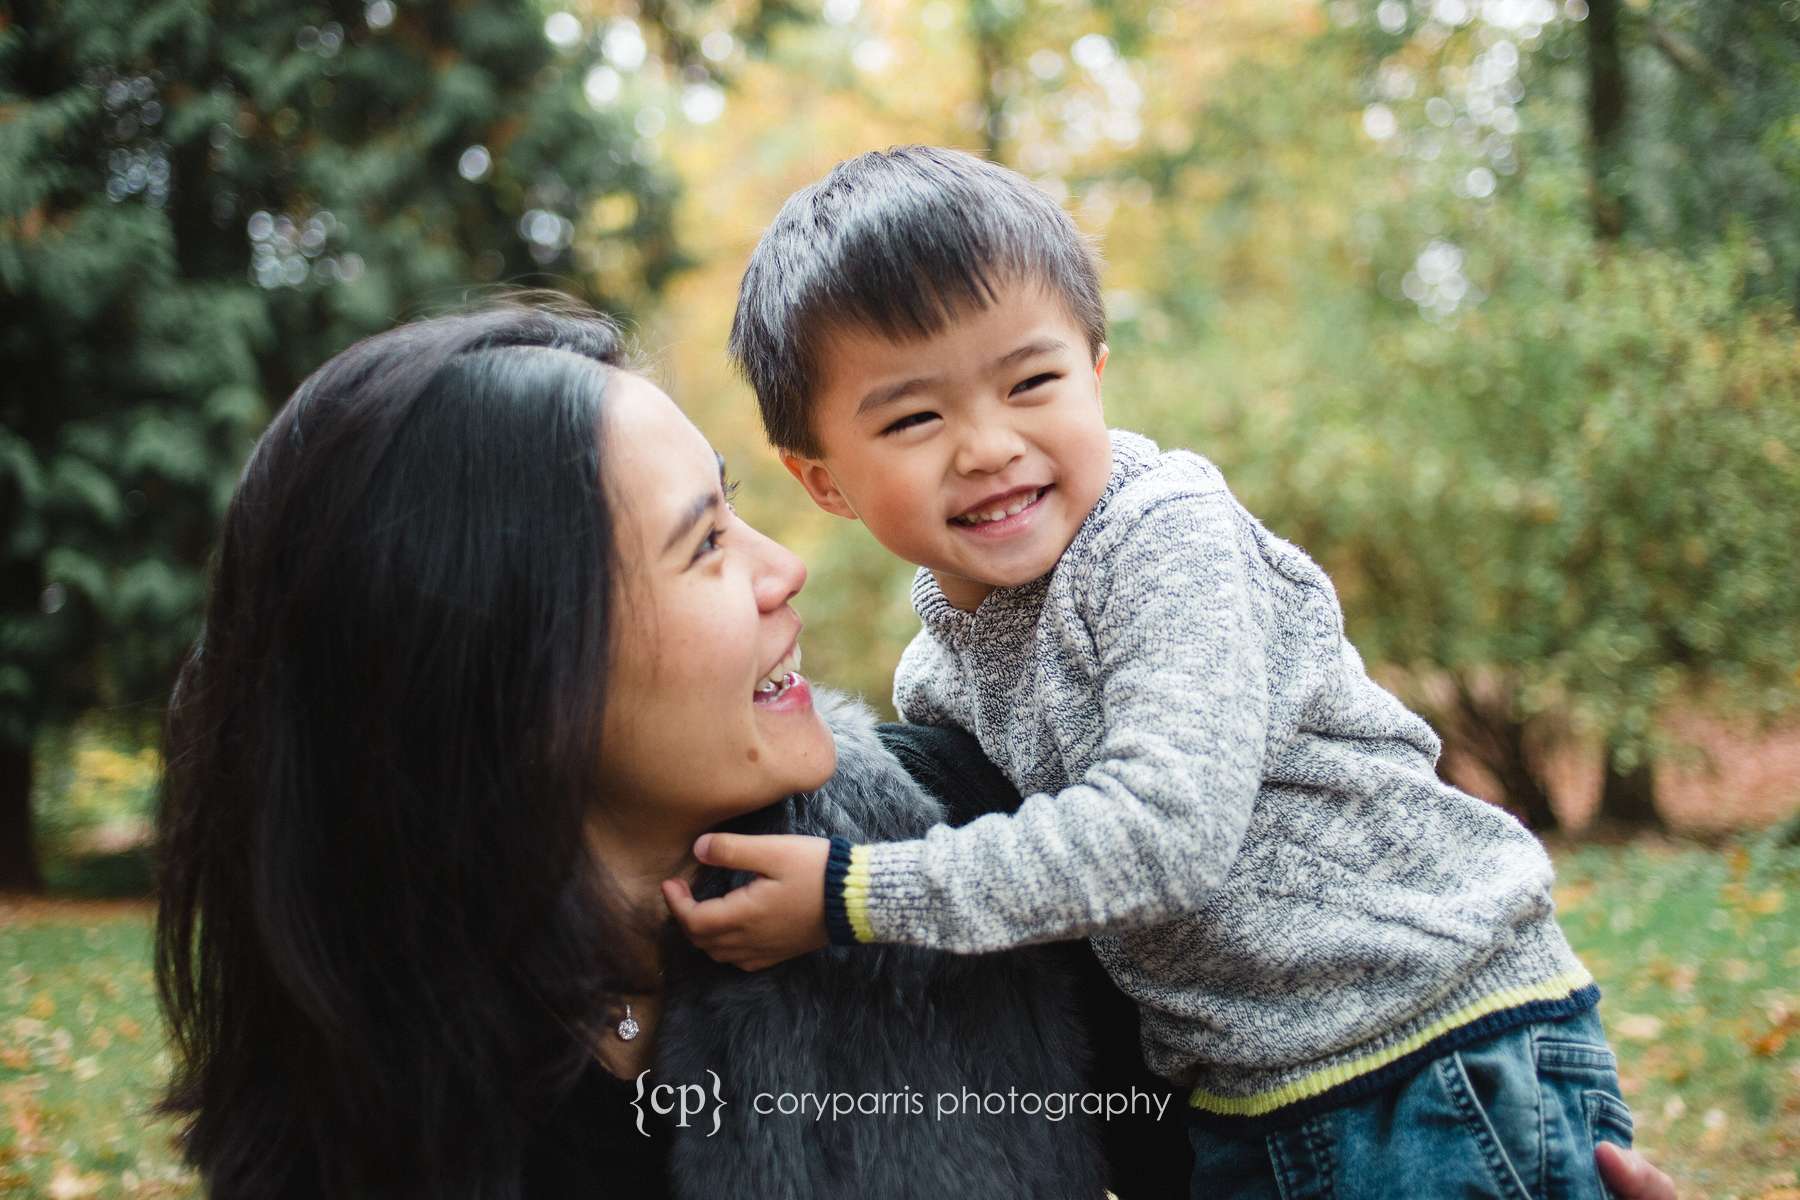 Kids and family portraits in Seattle